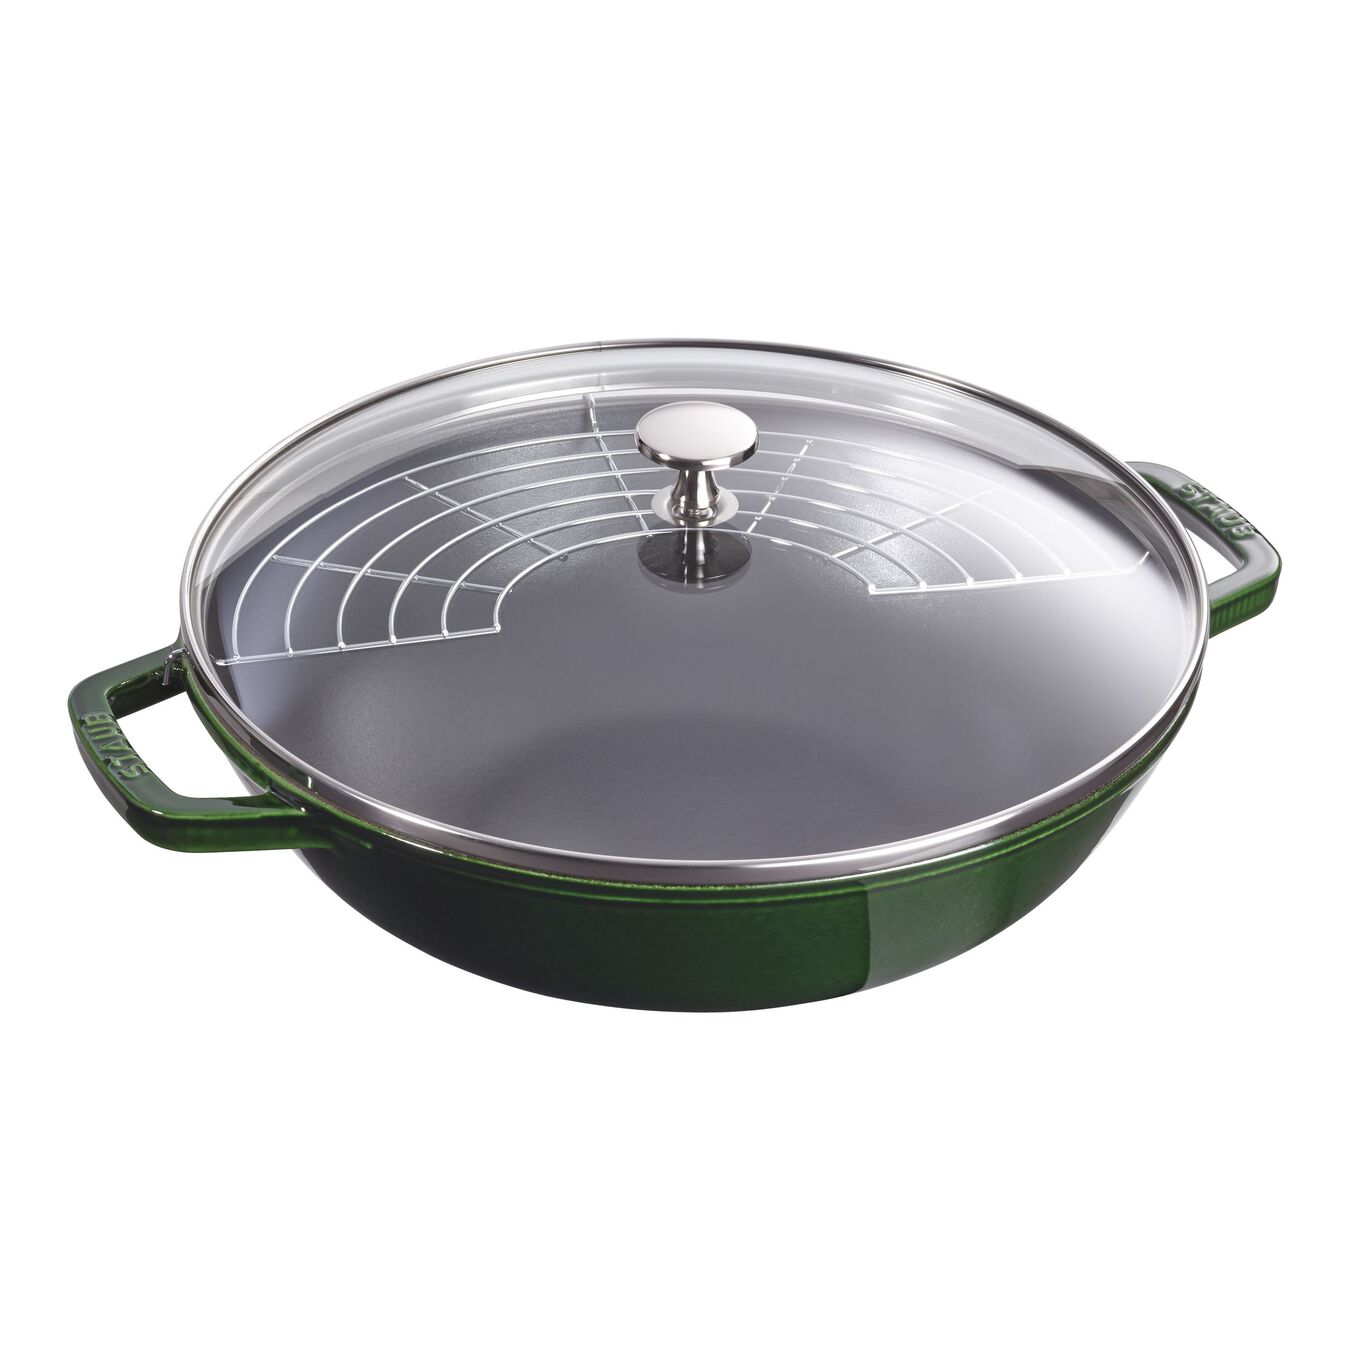 30 cm / 12 inch cast iron Wok with glass lid, basil-green,,large 1